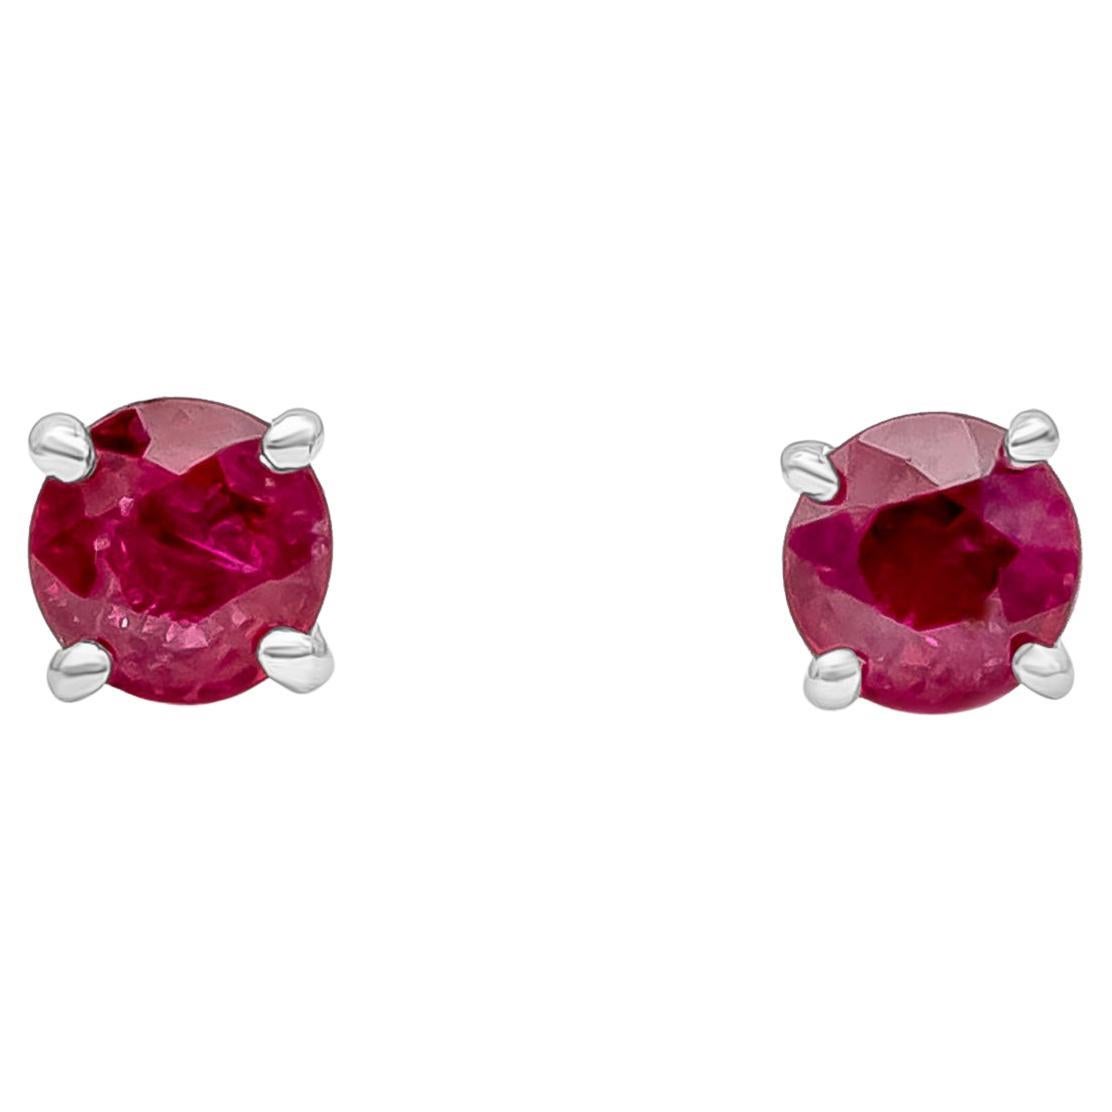 A classic pair of stud earrings showcasing vibrant red round cut rubies weighing 1.12 carats total. Mounted in a timeless four-prong design setting, Made with 18K White Gold.

Style available in different price ranges. Prices are based on your